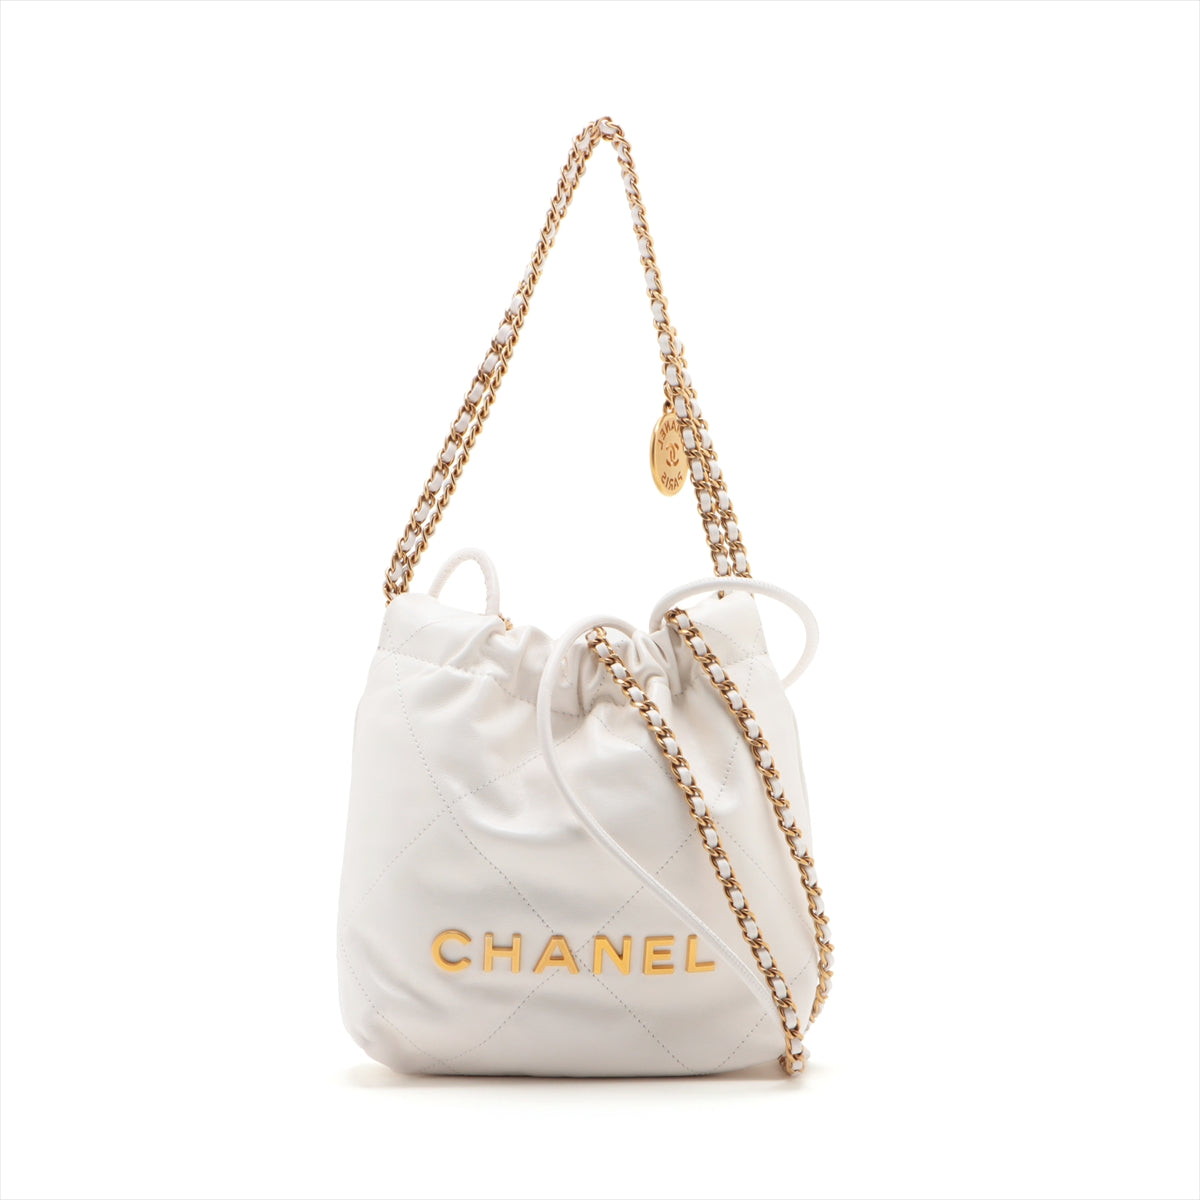 Chanel Chanel 22 mini Leather Chain shoulder bag White Gold Metal fittings AS3980